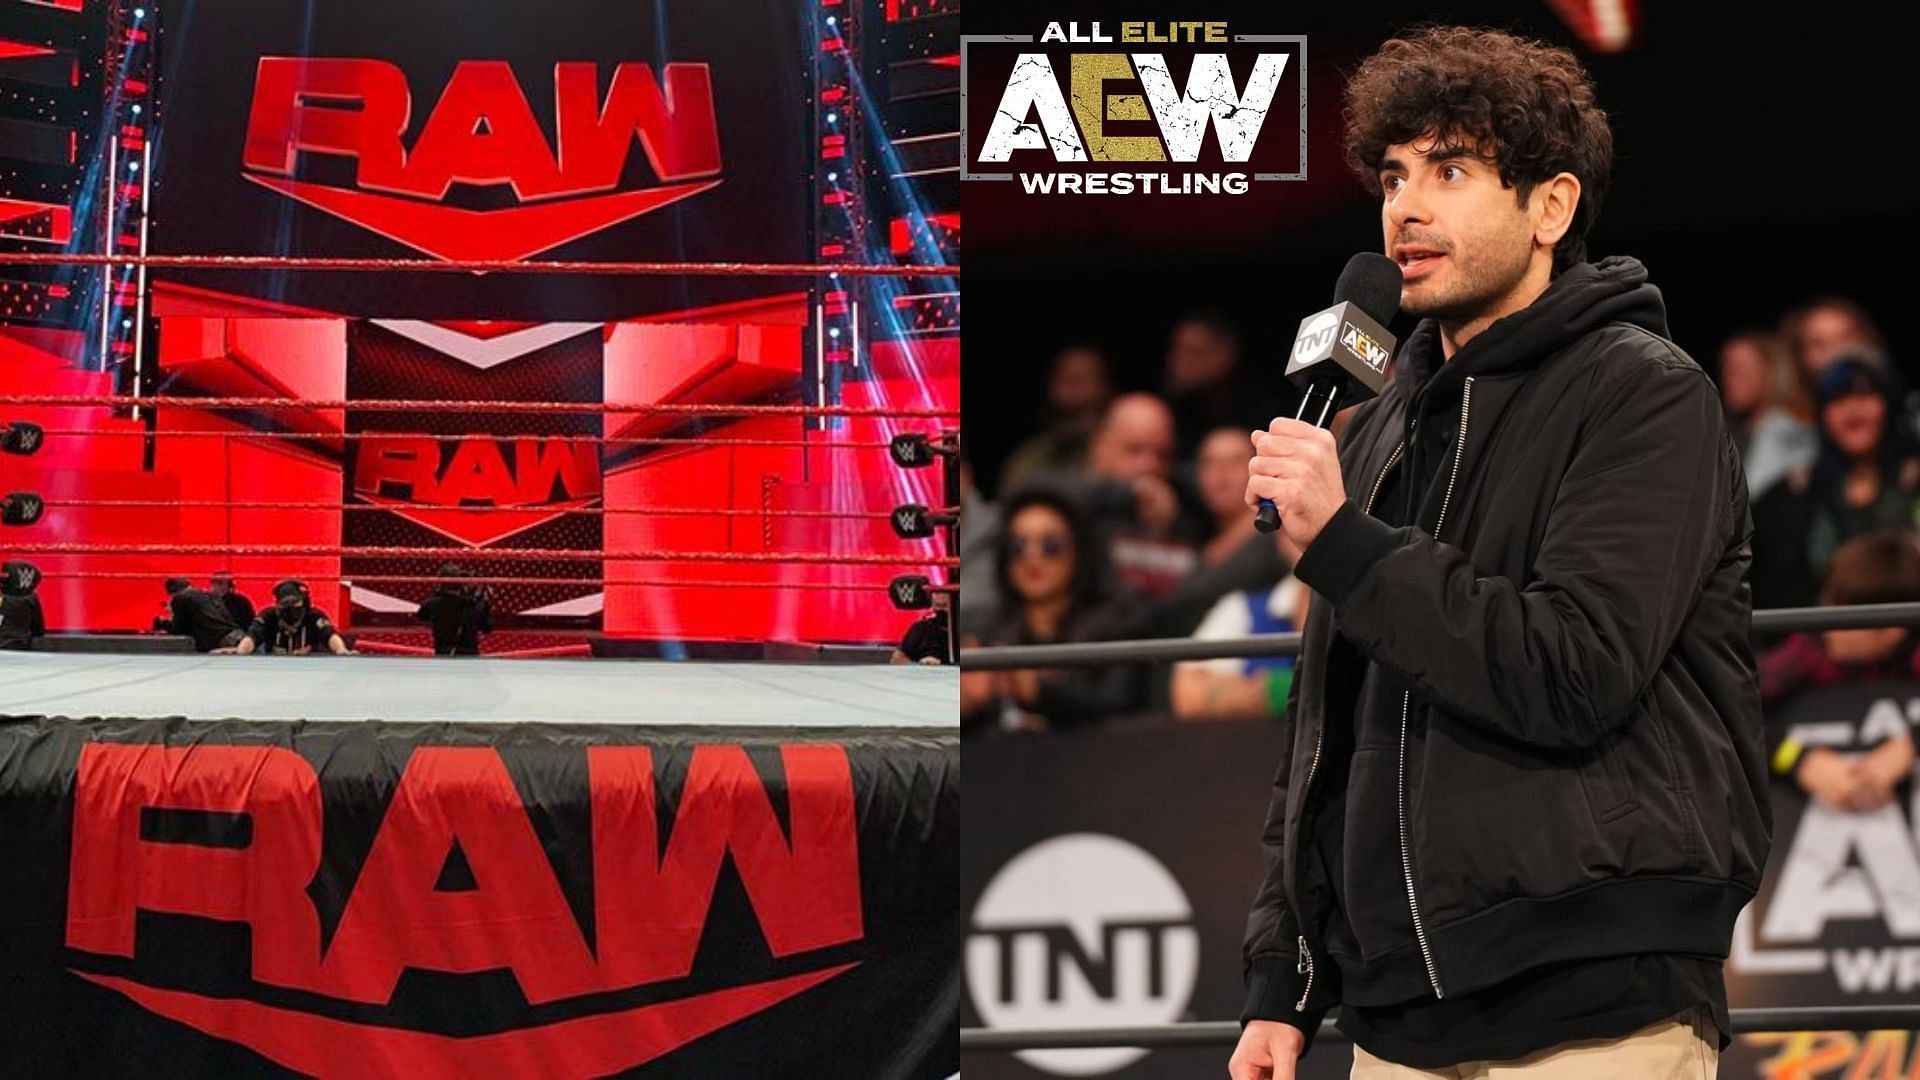 Former RAW Tag Team Champions are scheduled for a title match in AEW